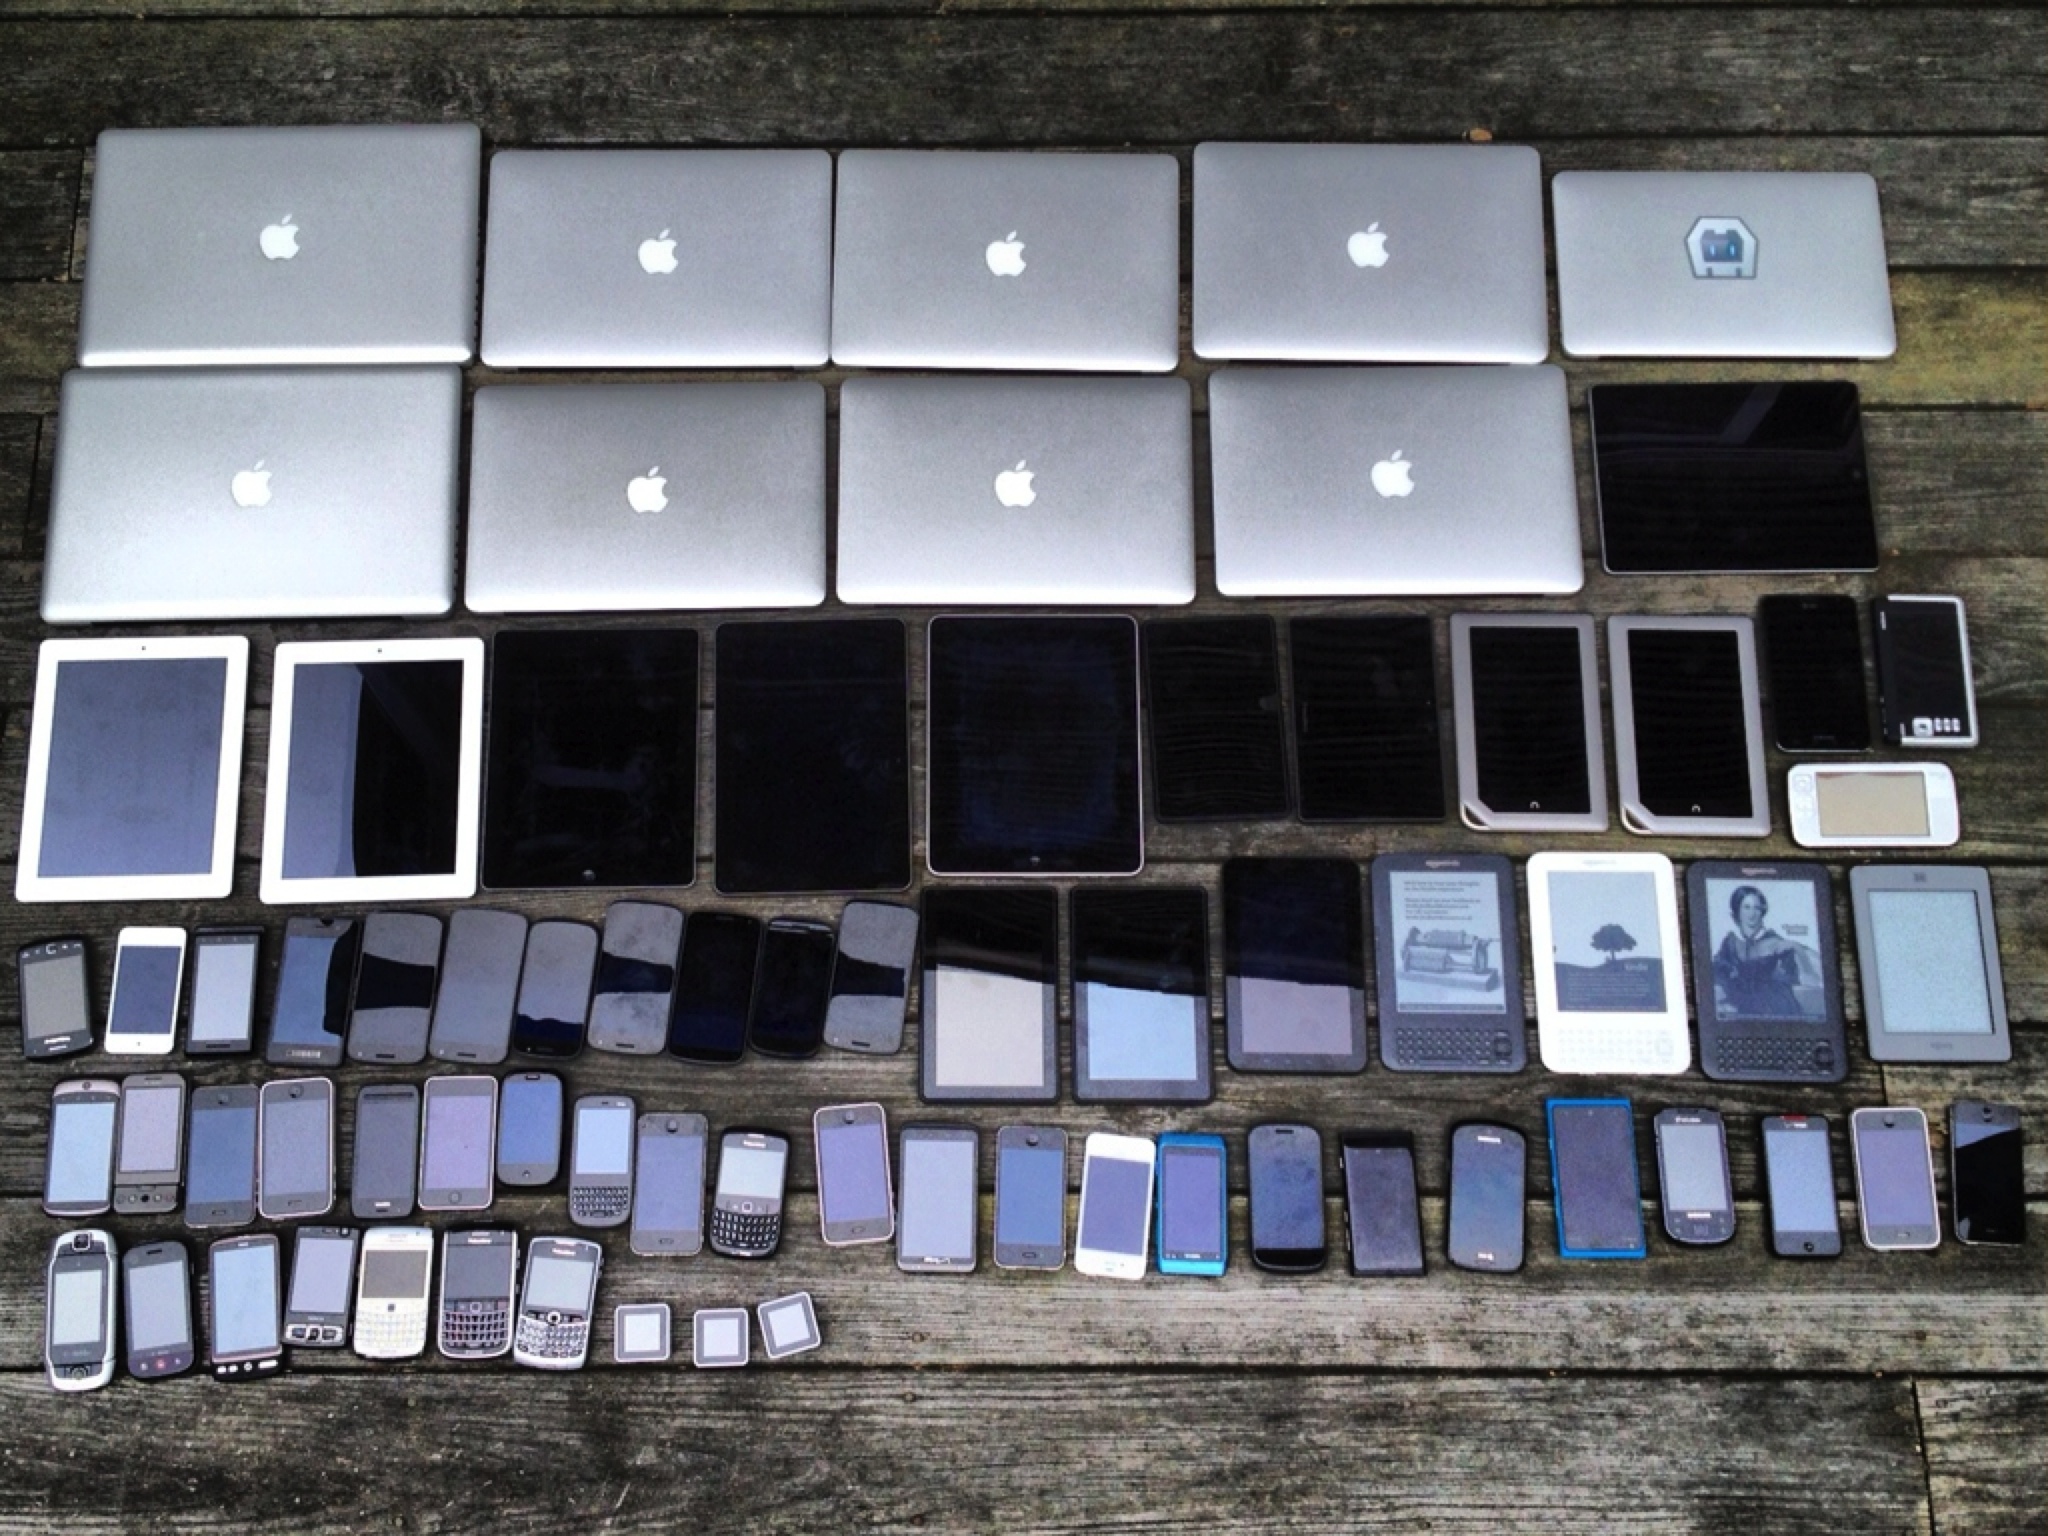 A lot of different devices